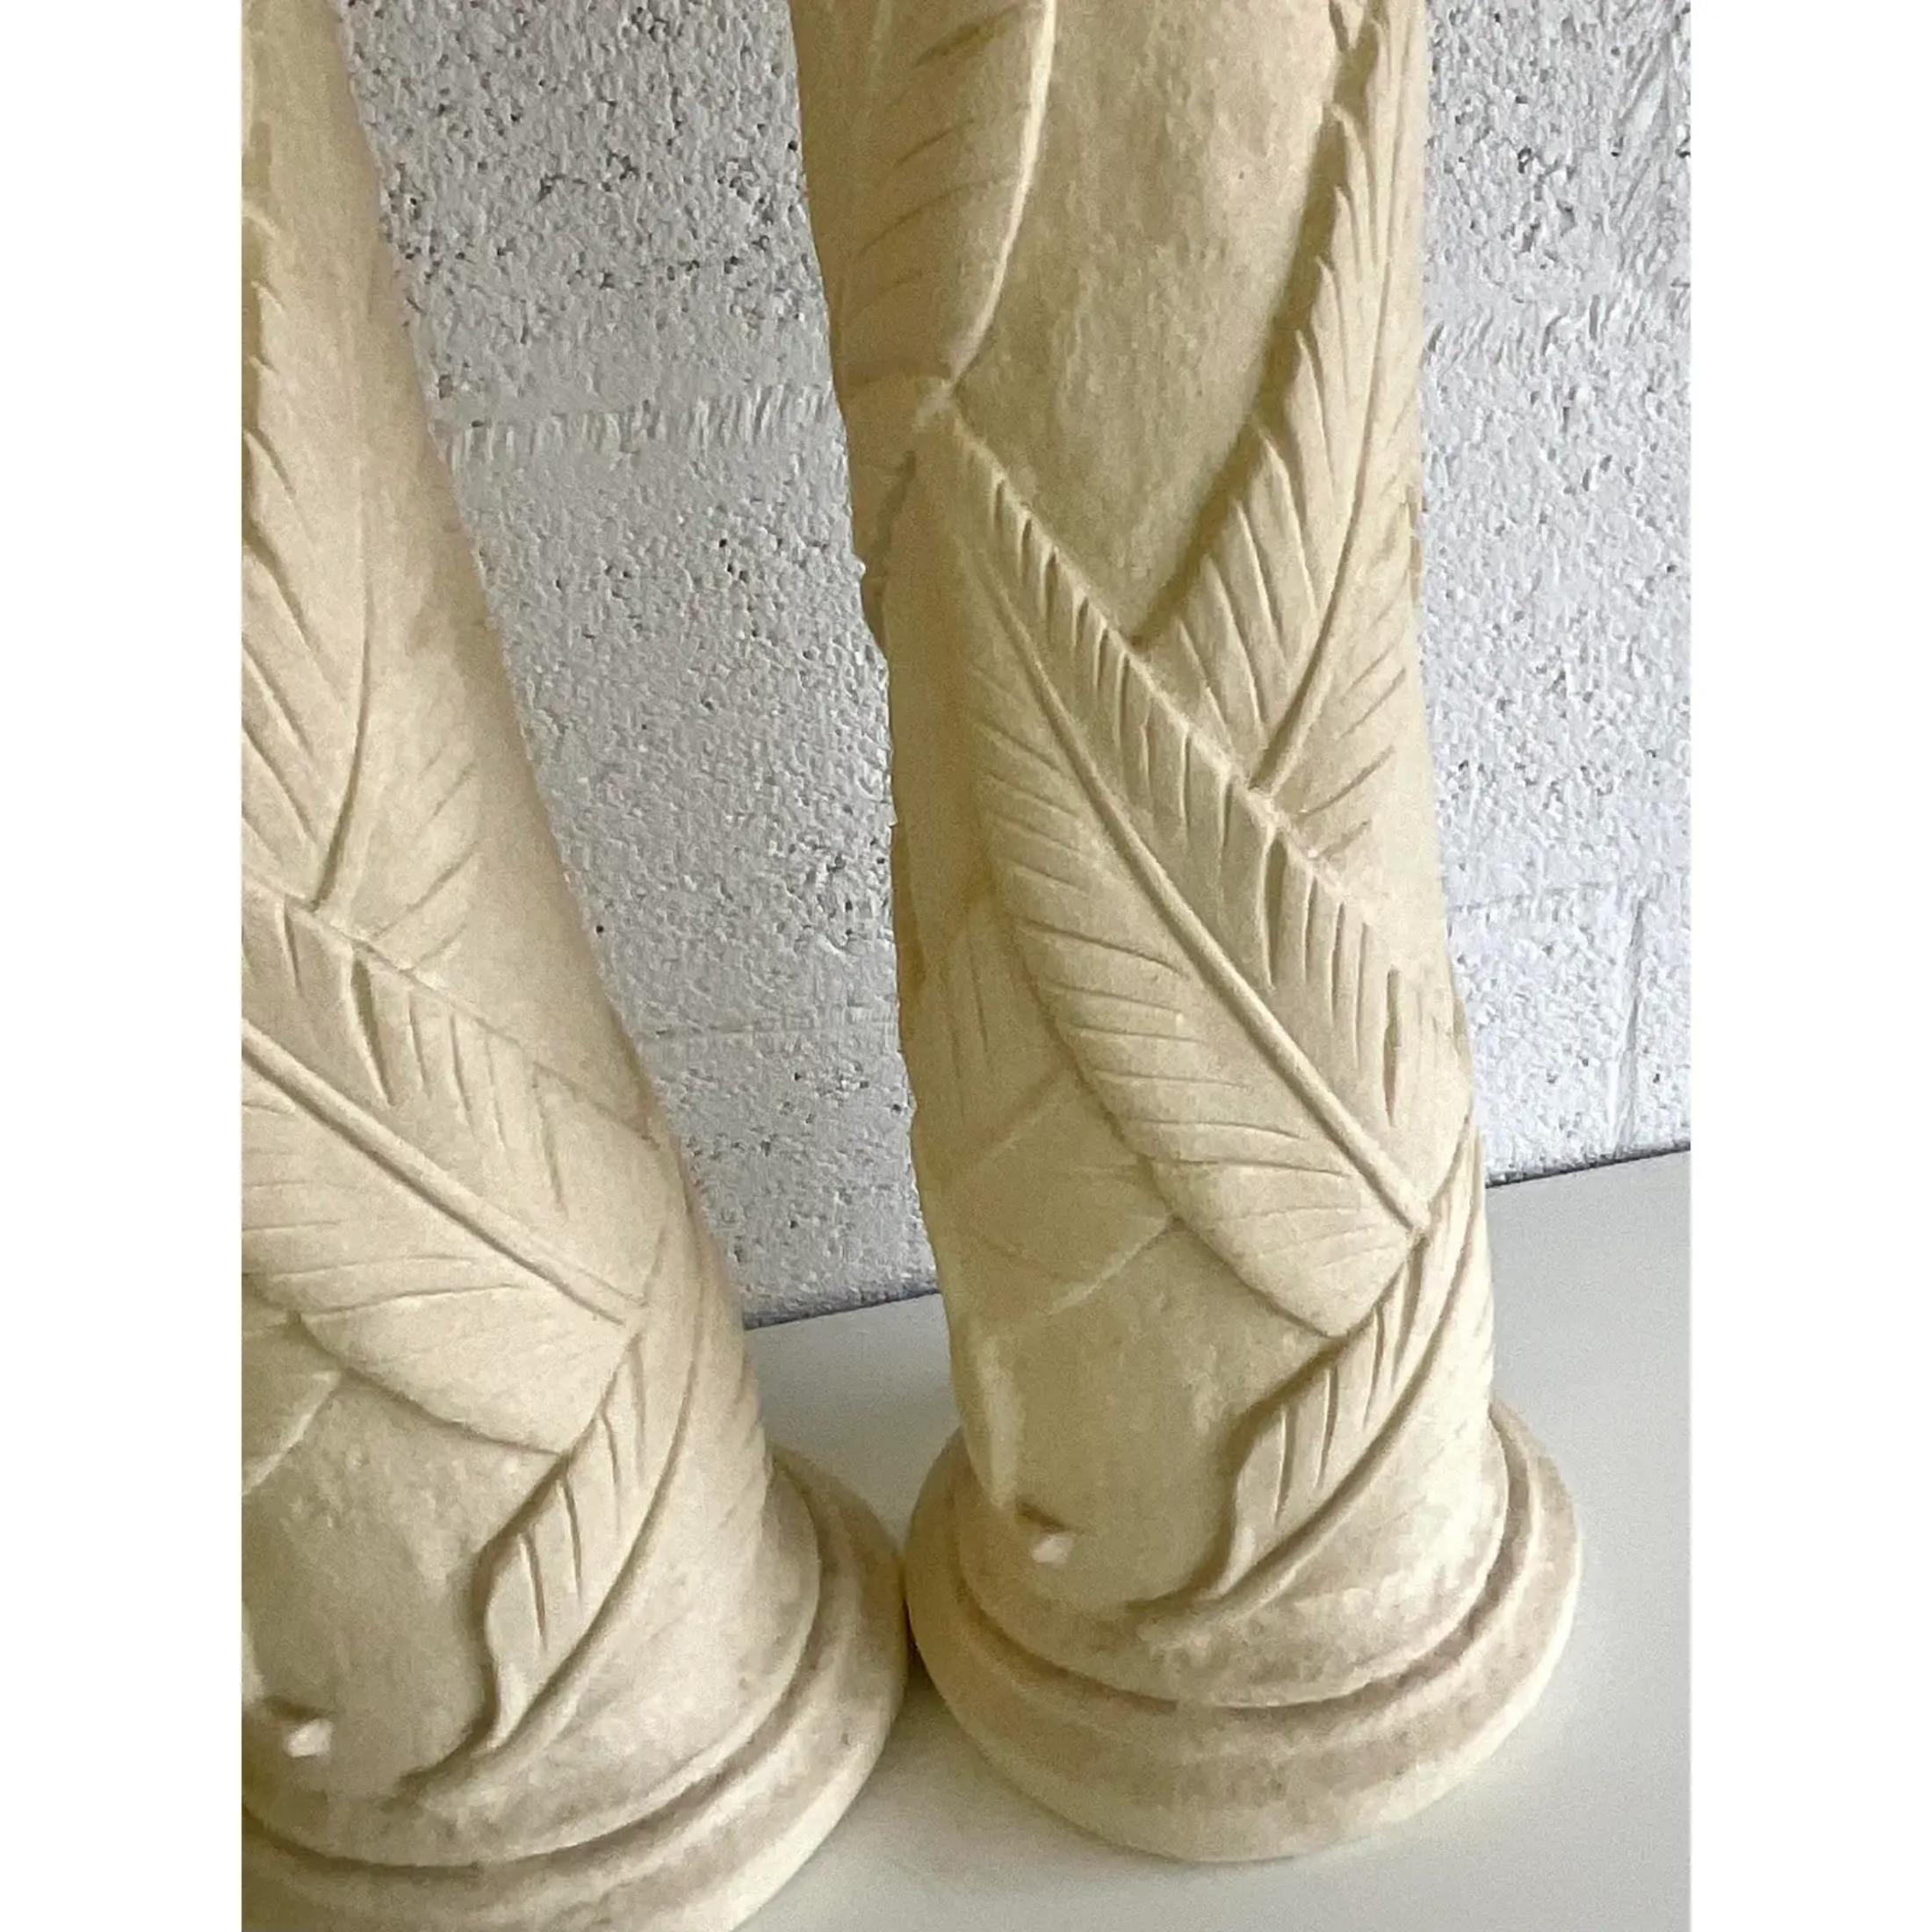 Fantastic pair of vintage plaster lamps. Beautiful fern relief on tall and elegant cylinder bases. Perfect as is or paint them a bright white for a clean modern look. Acquired from a Palm Beach estate. 